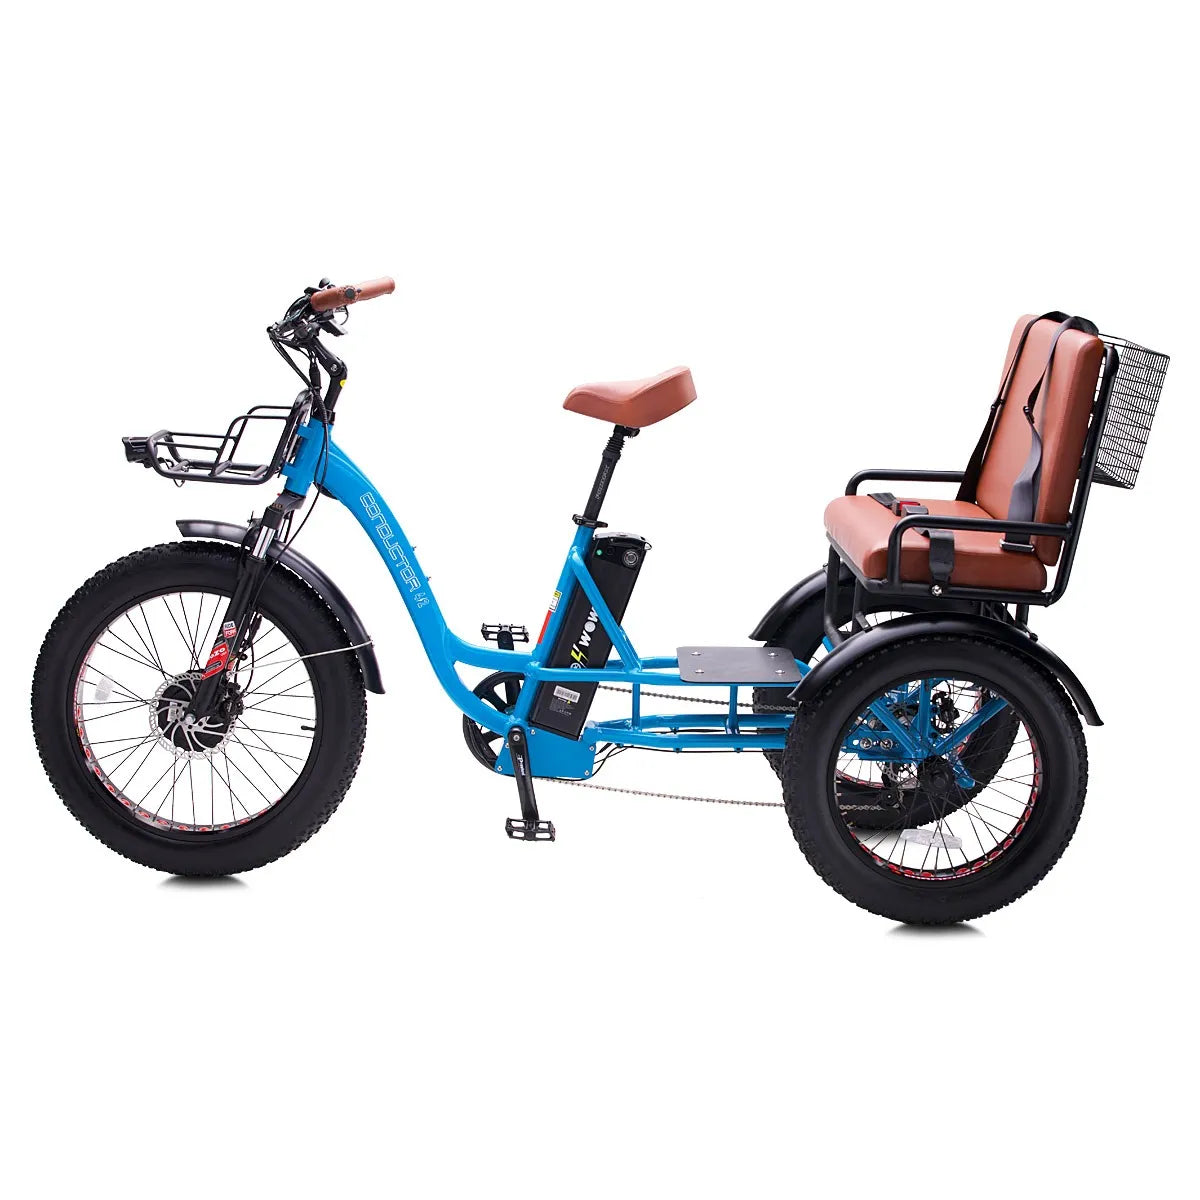 Oh Wow Cycles Conductor 4-2 Rickshaw Electric trike